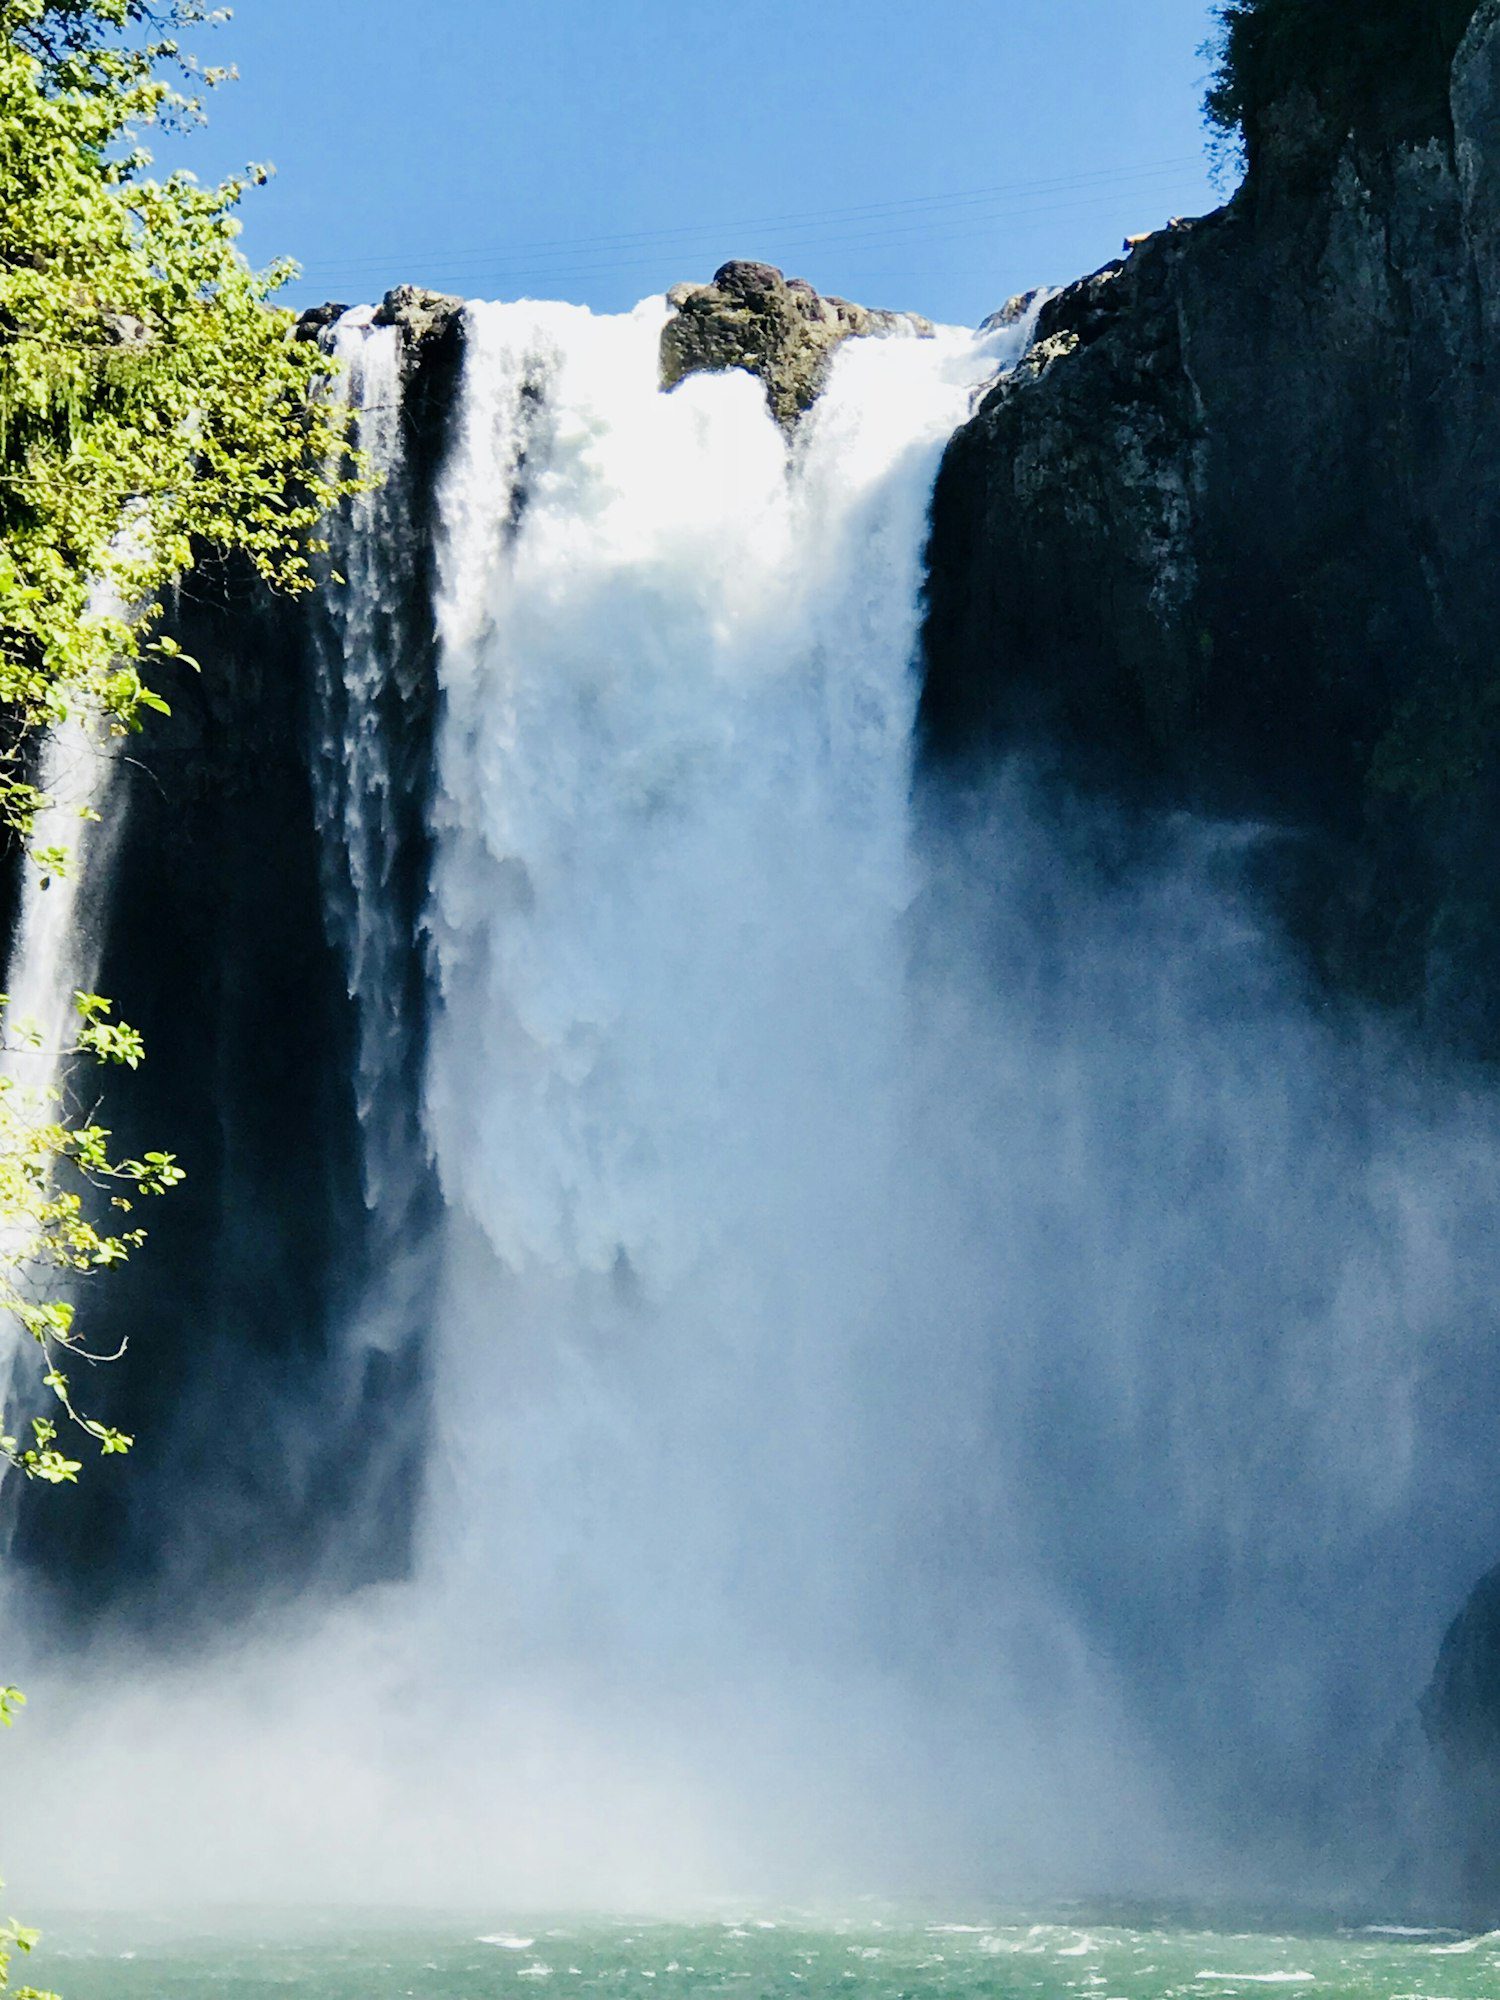 Looking up at Snoqualmie Falls a natural beauty.